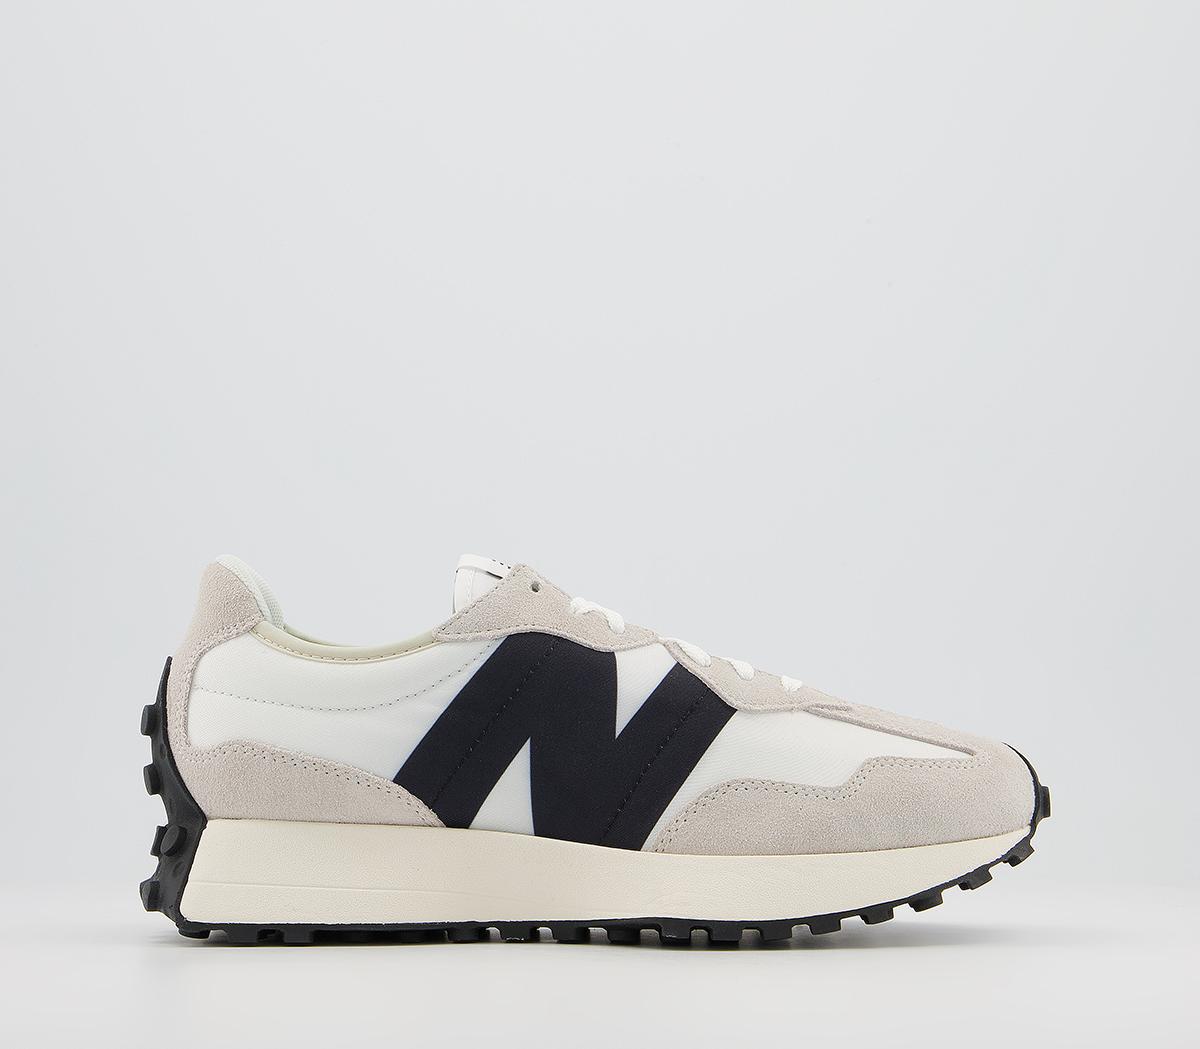 New Balance 327 Trainers Natural Sea Salt - His trainers